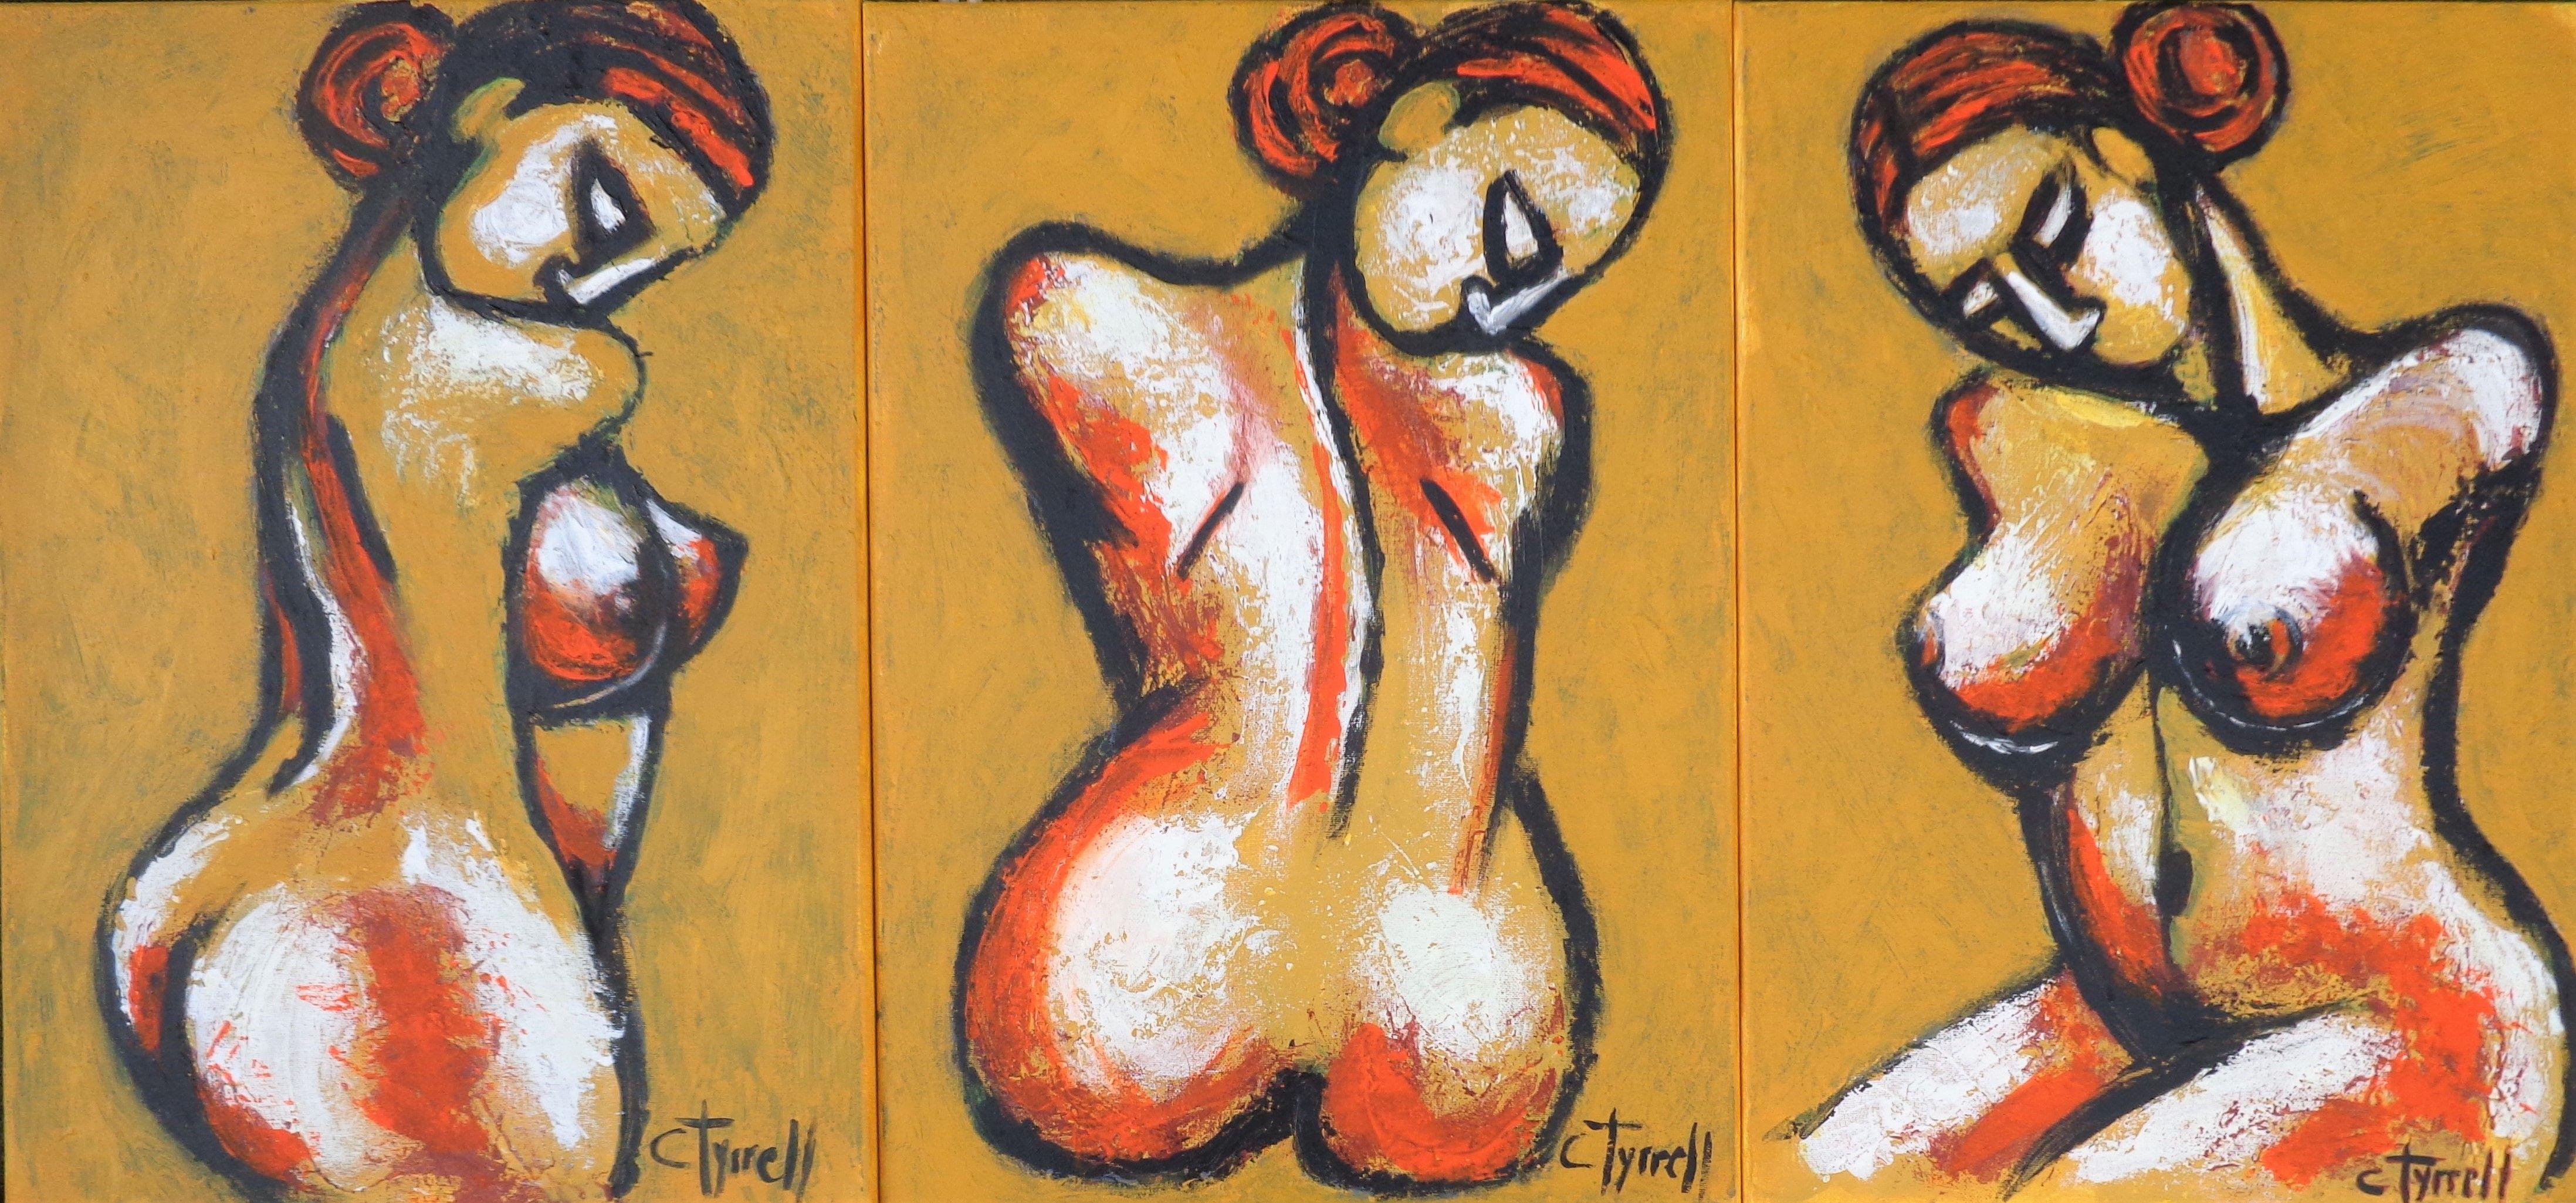 Original semi-abstract figurative acrylics painting on canvas, painted edges and ready to hang. The "Earth Goddess - Triptych", symbolizes all life and fertility, who is nourishing, nurturing and protecting.There are three individual canvas